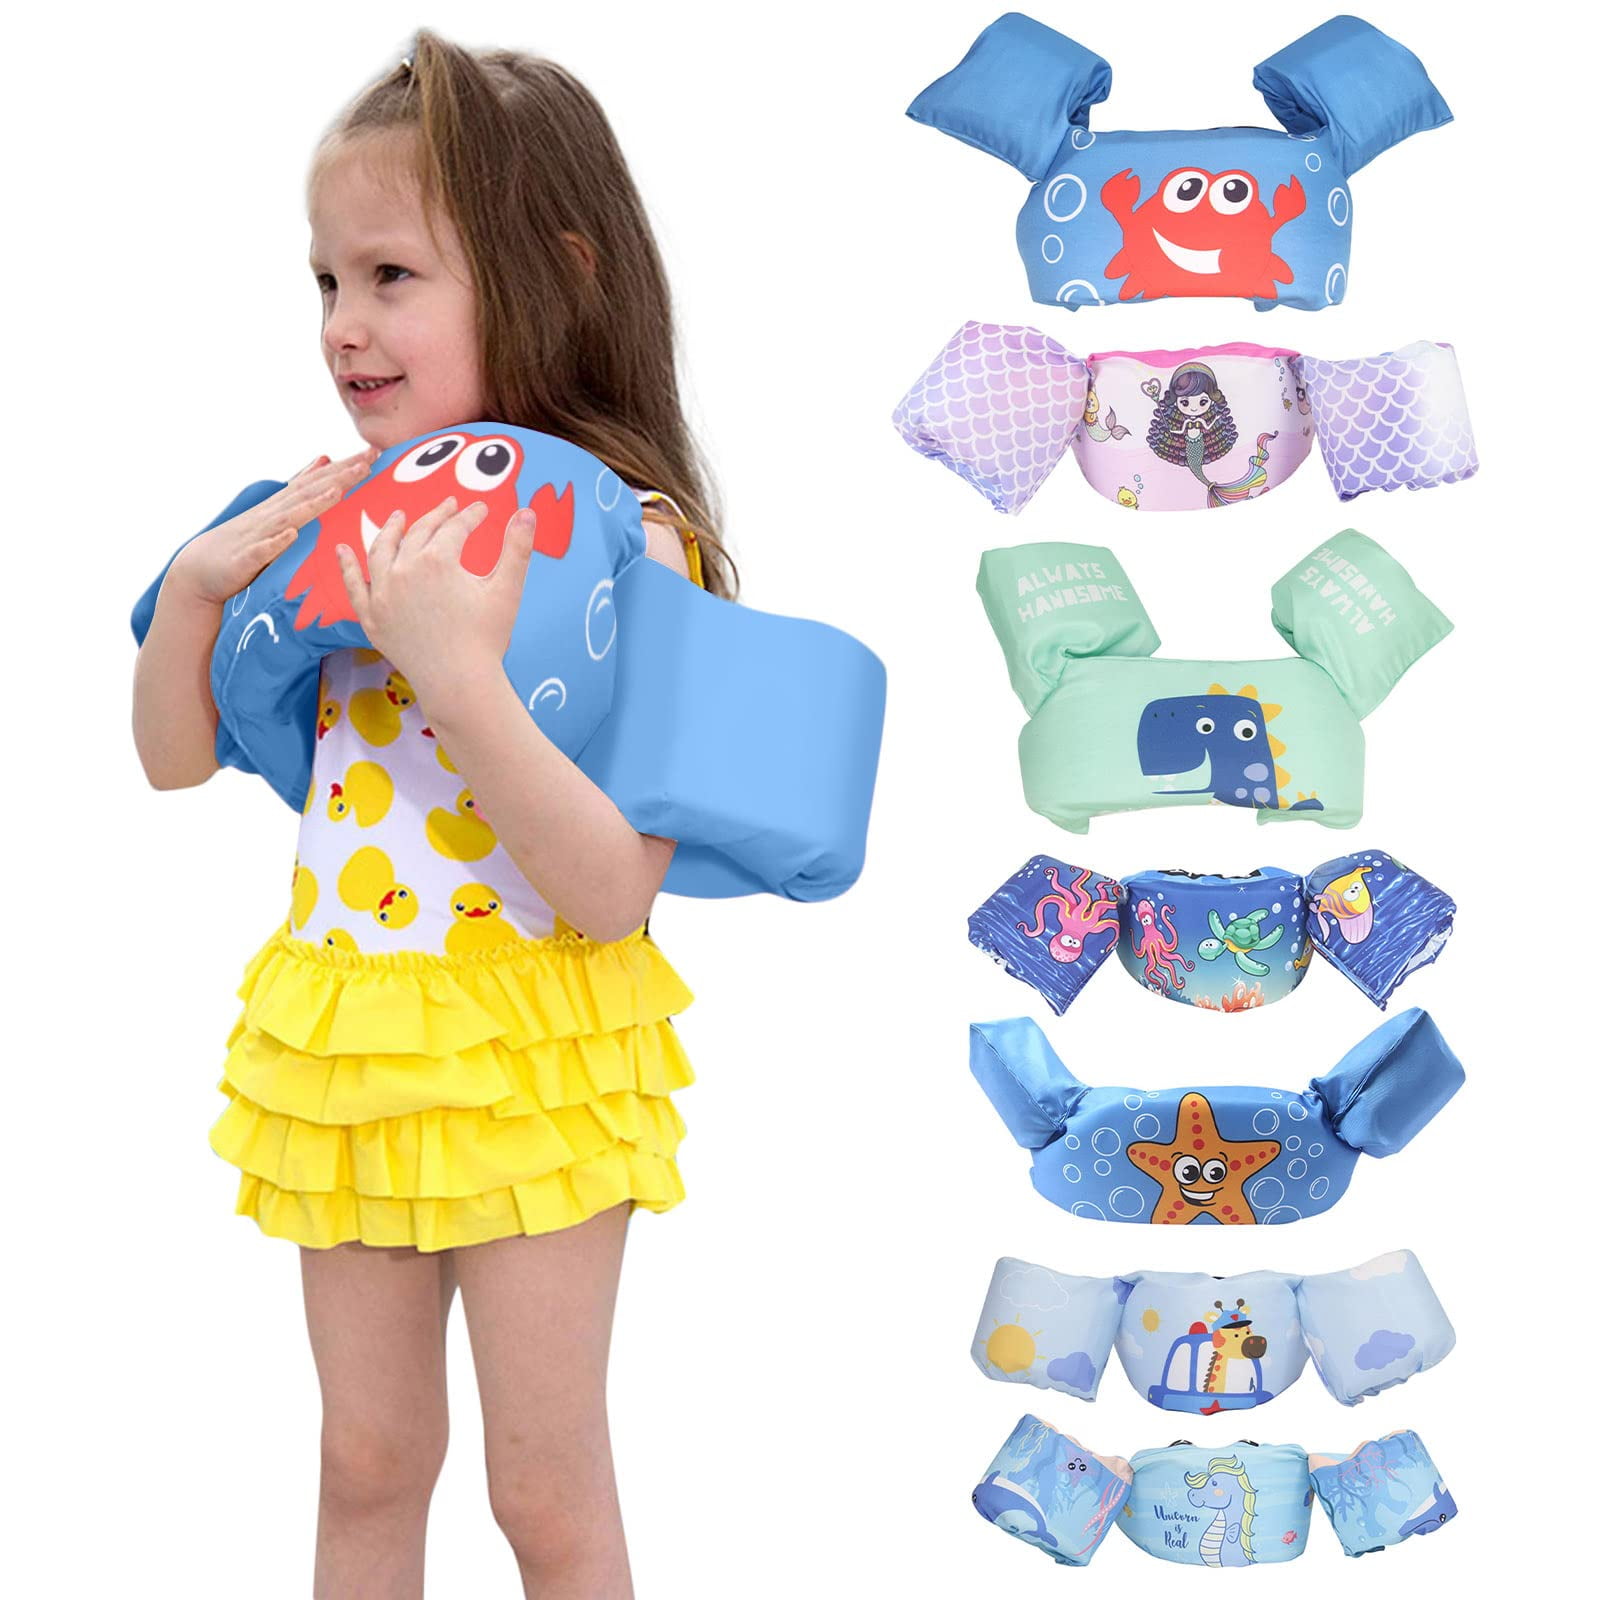 Kids Swim Float Vest Learn to Swimming Kids Life Jacket from 30 to 55 Lbs 2-6 Years Baby Floats for Pool Vest with Arm Wings Aid Trainer Boys Girls Children Adjustable Safety StrapDinosaur 